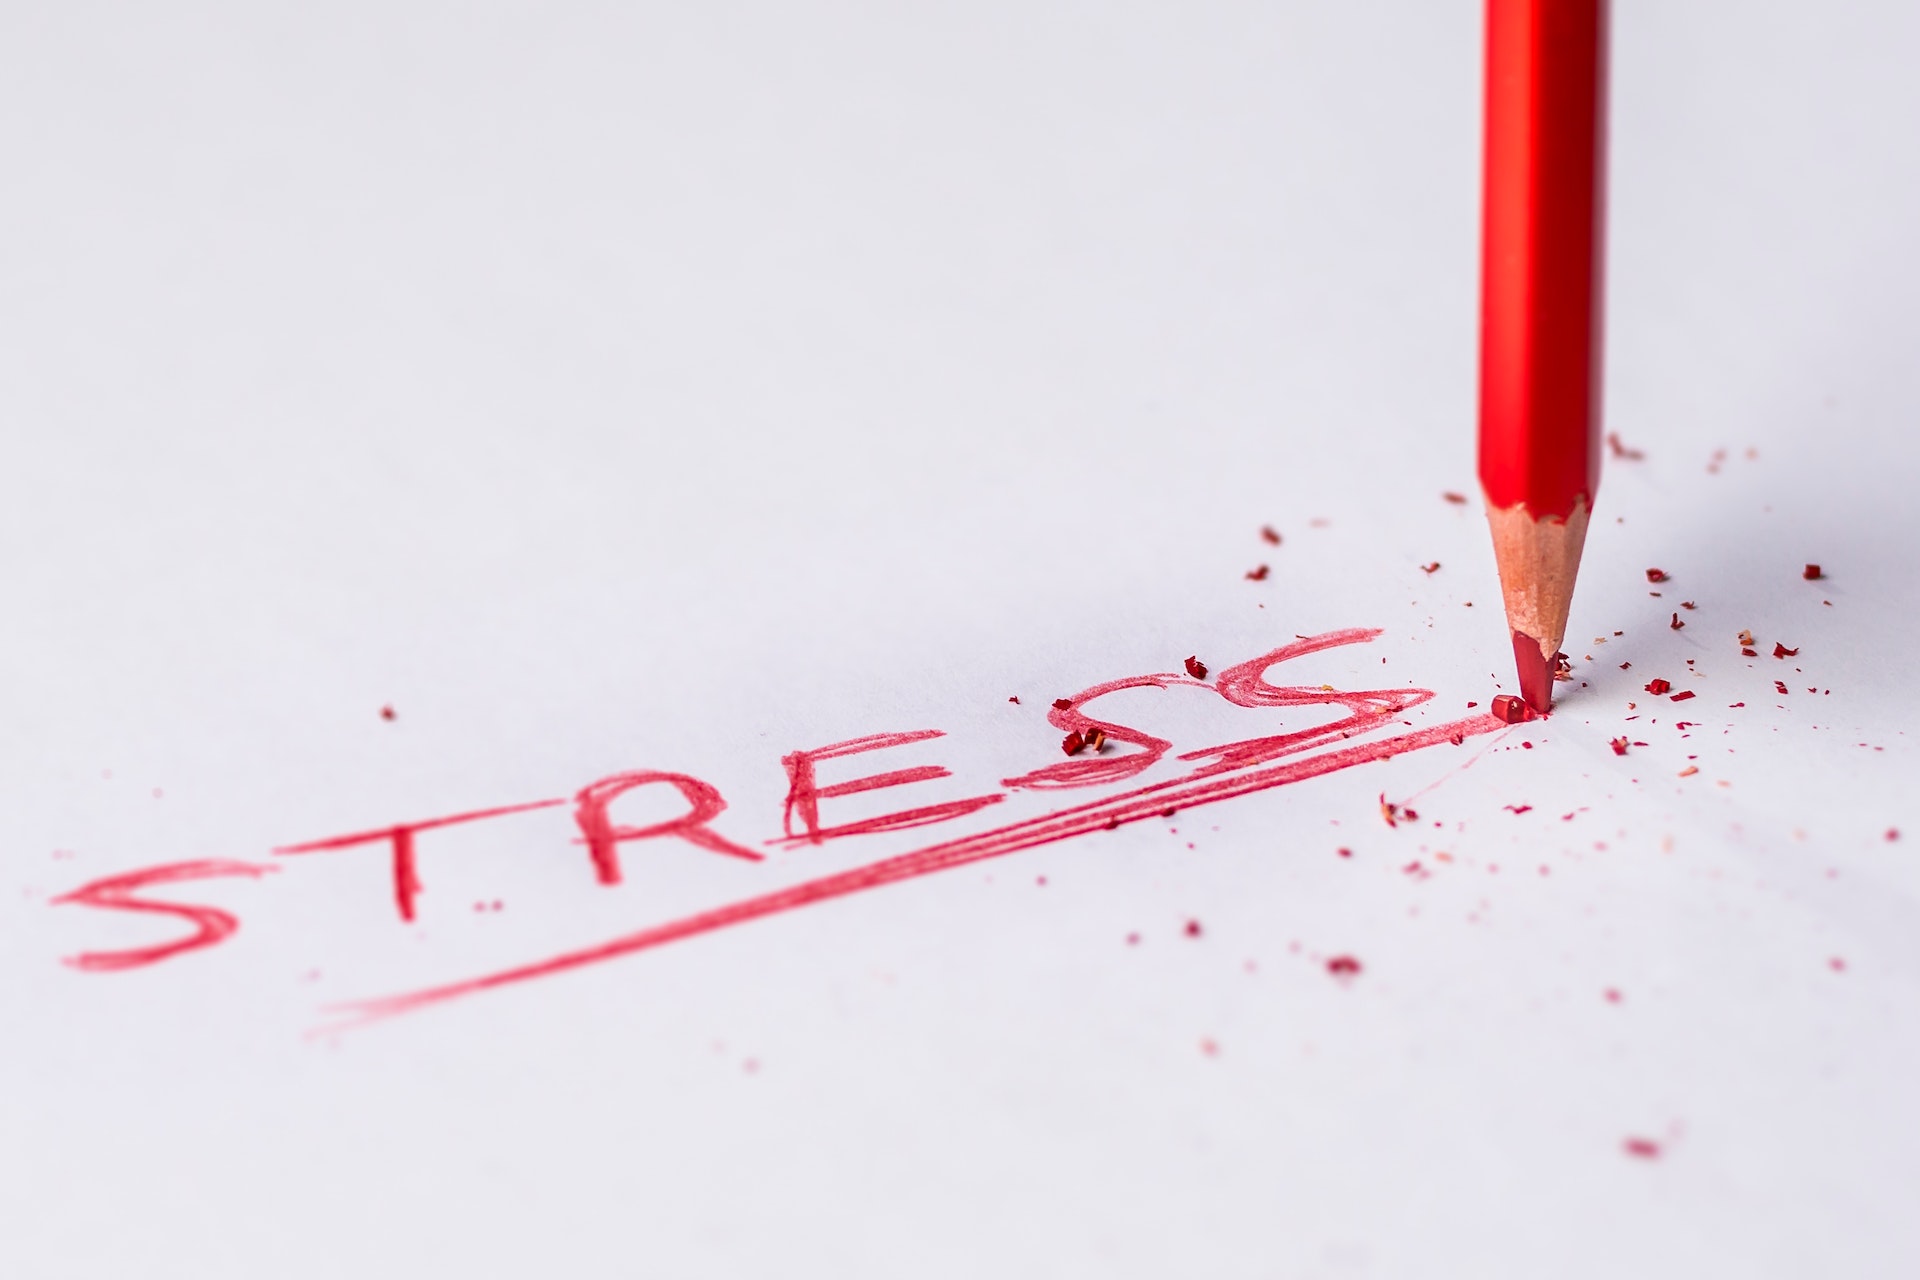 he word stress written in red colored pencil on a white piece of paper